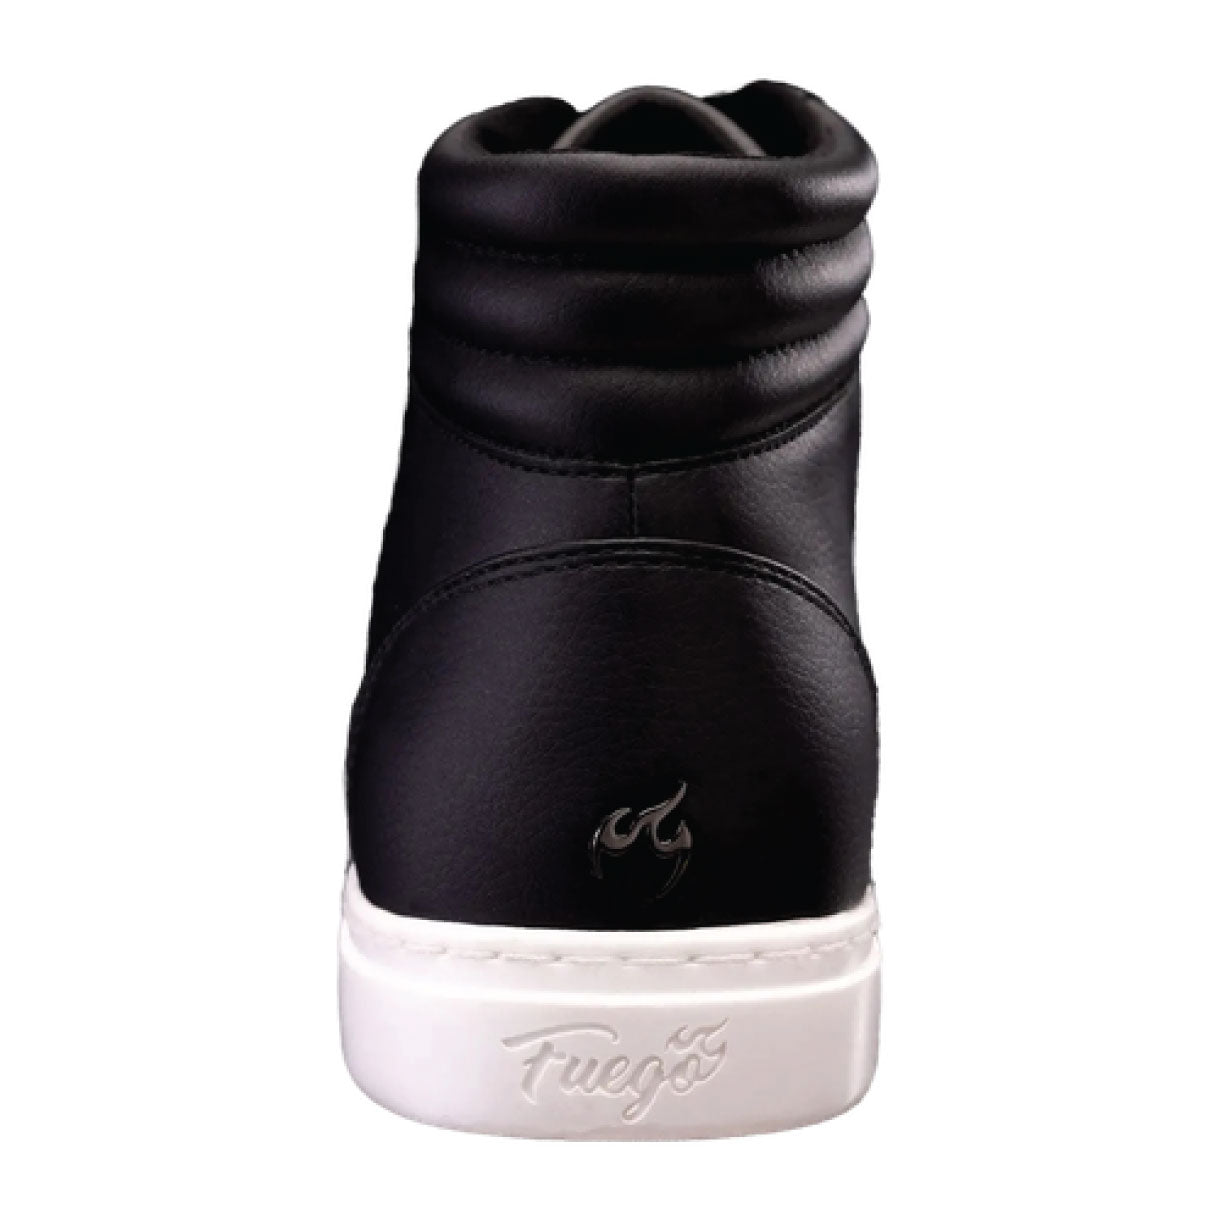 Fuego high top dance sneakers in black and white